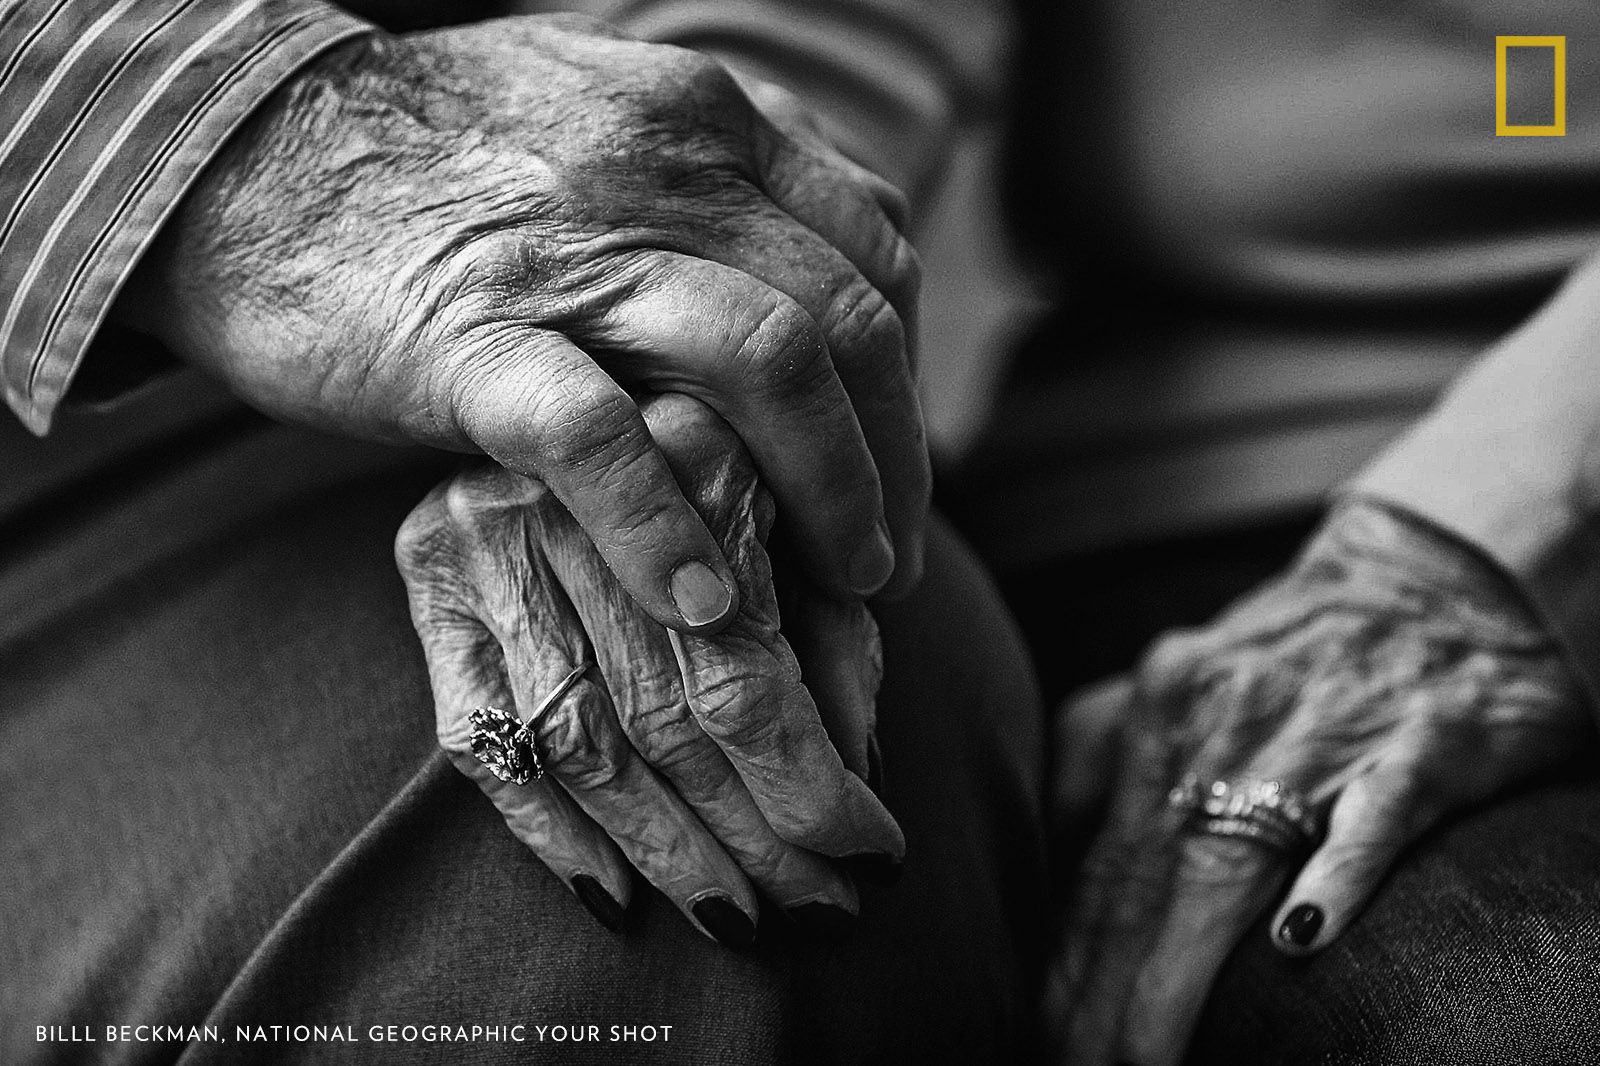 A half century of wedded life, raising children, teaching special needs children for 30 years wore these beautiful hands thin. Still there was strength for her man. Image by Bill Beckman.